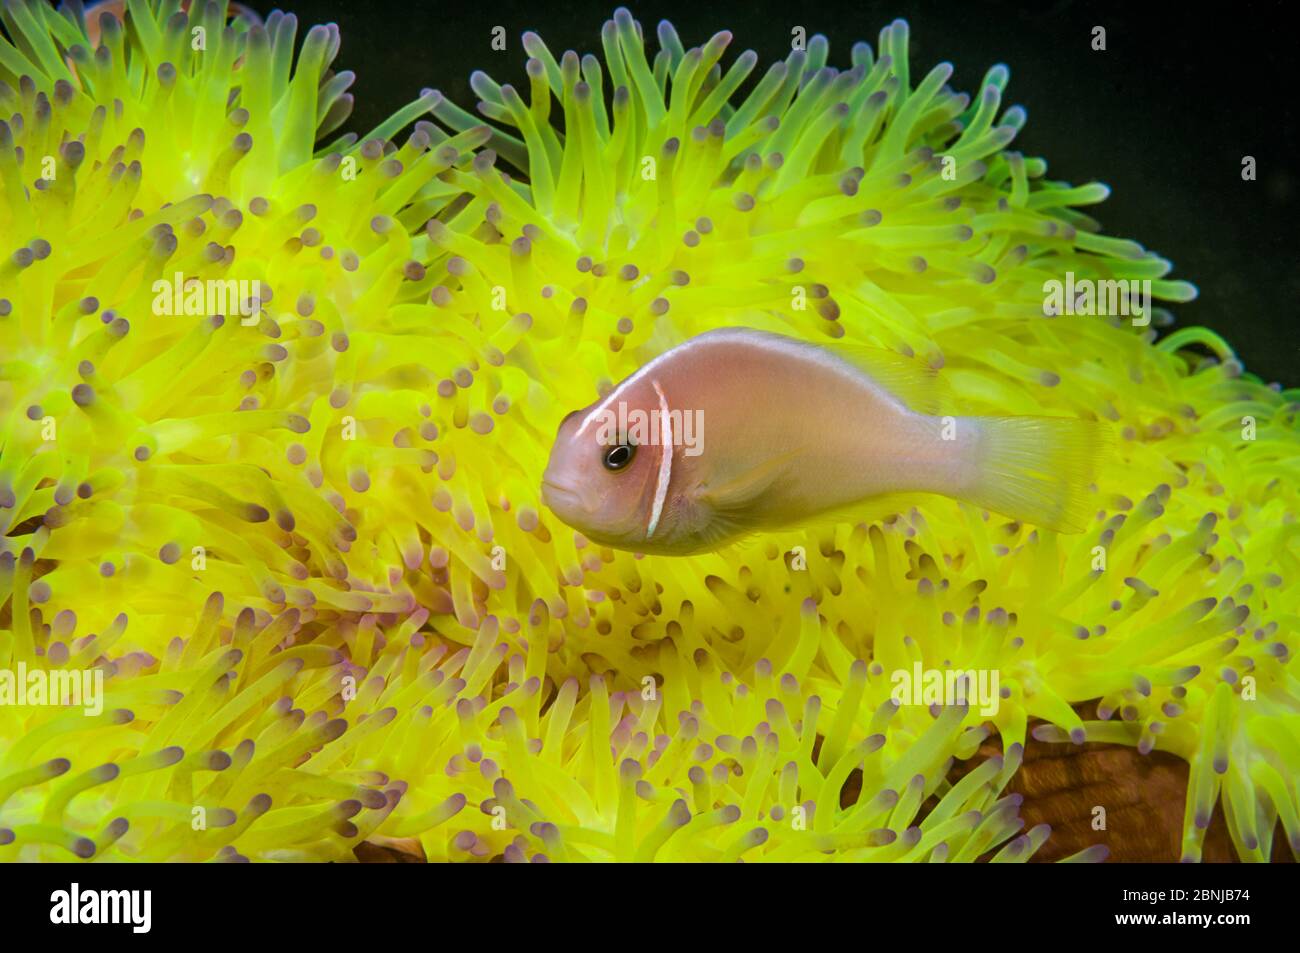 Pink anemonefish (Amphiprion perideraion) with host anemone (Heteractis magnifica) Bunaken National Park, North Sulawesi, Indonesia. Stock Photo